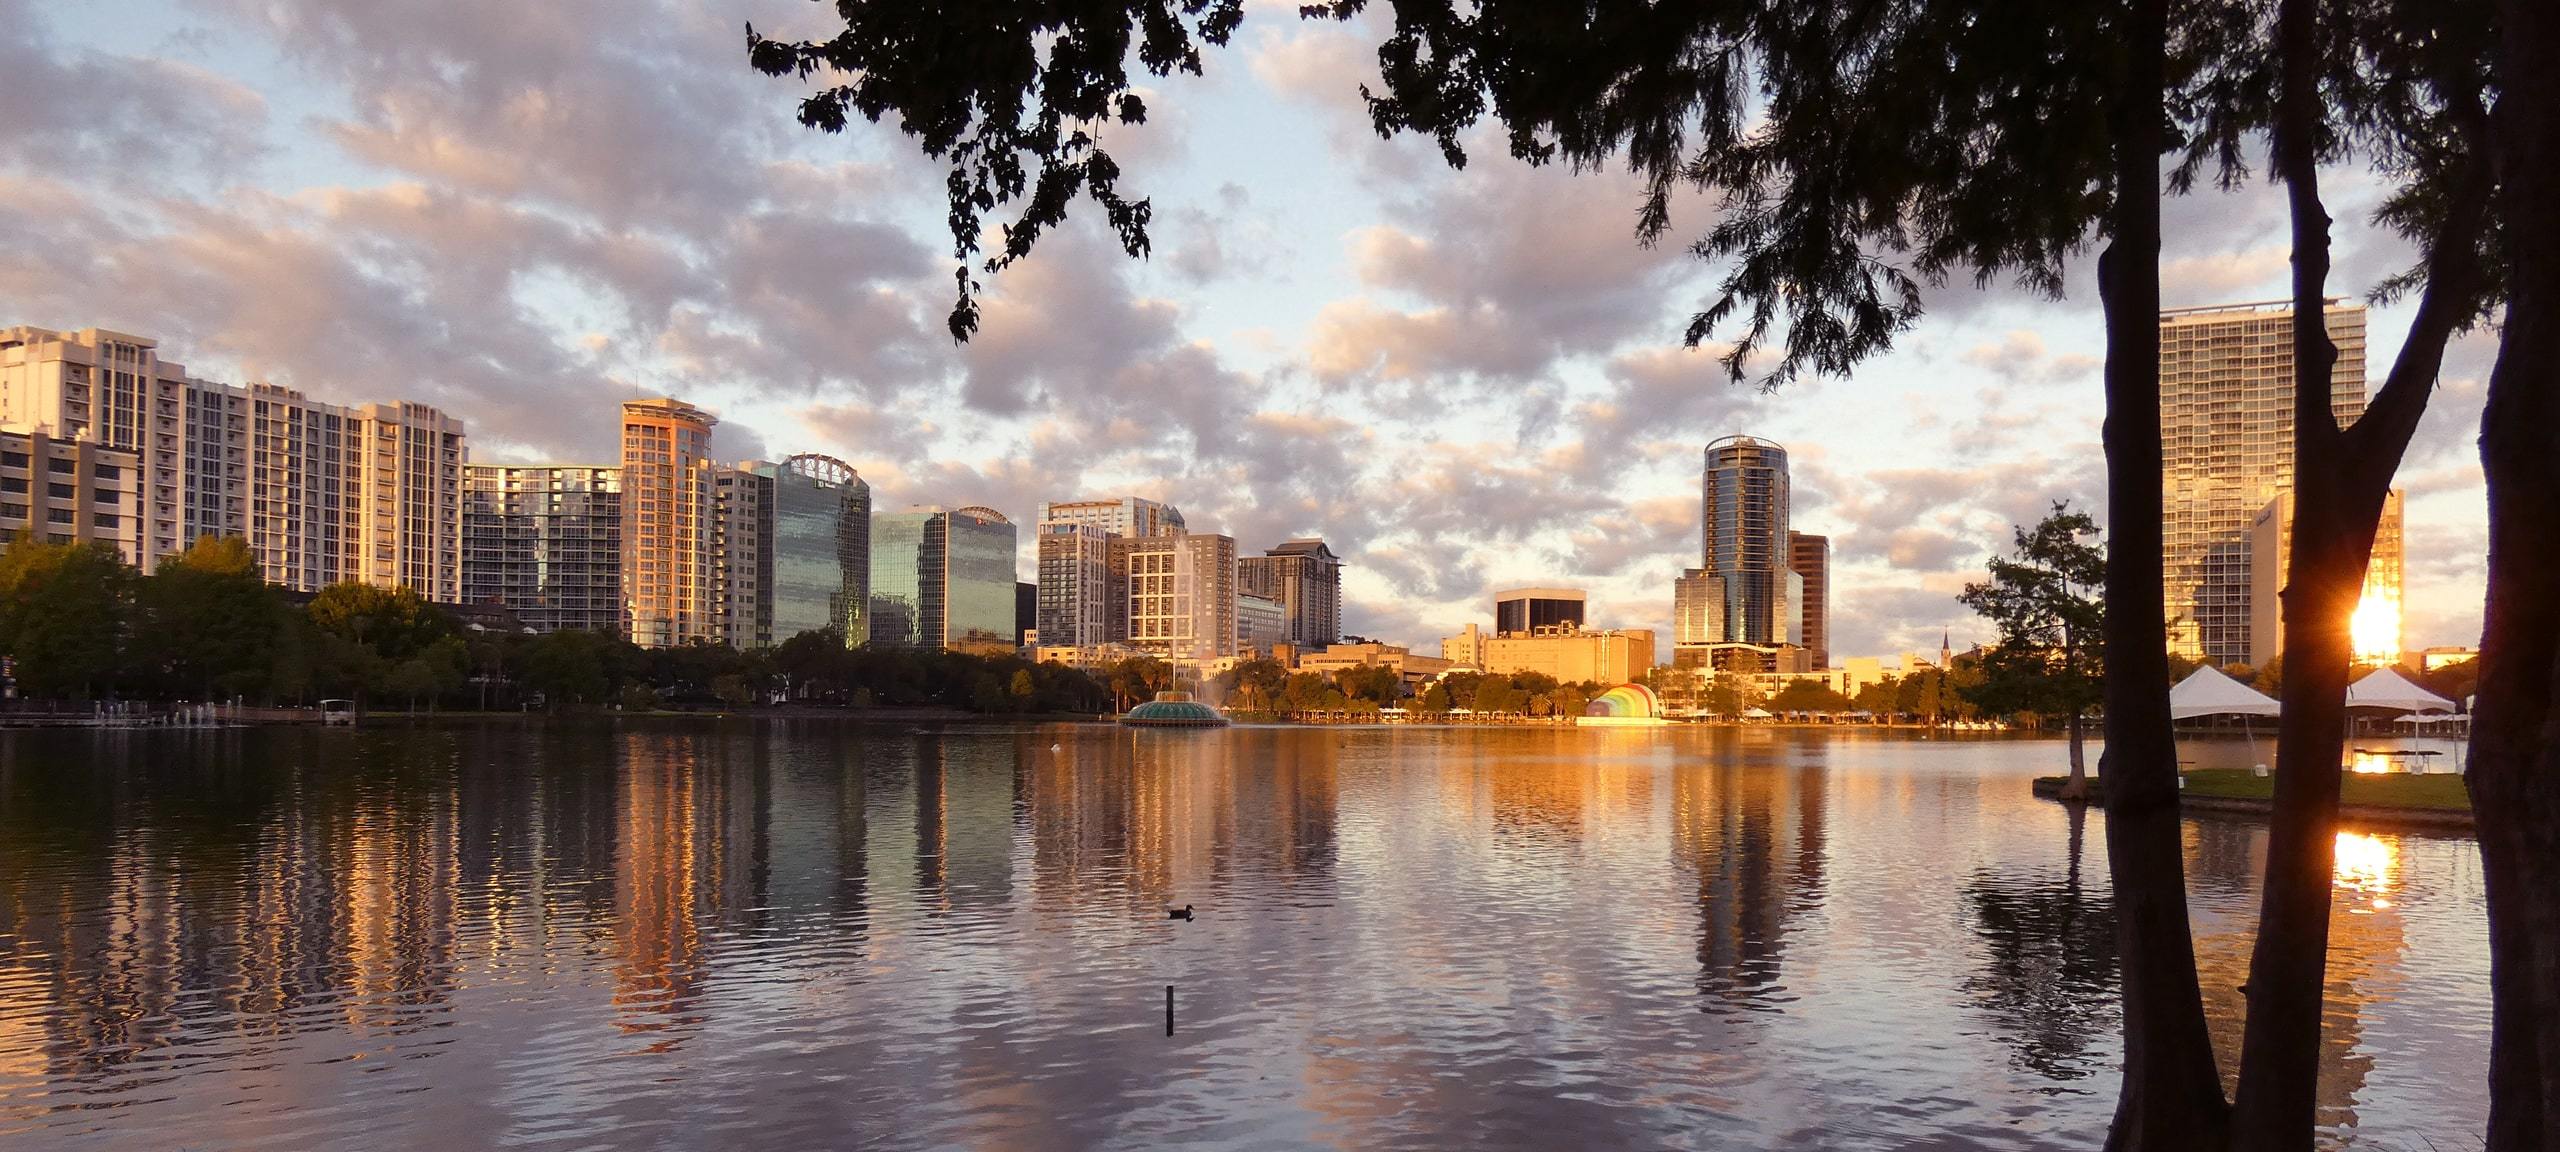 Sunset over Lake Eola condos in Downtown Orlando